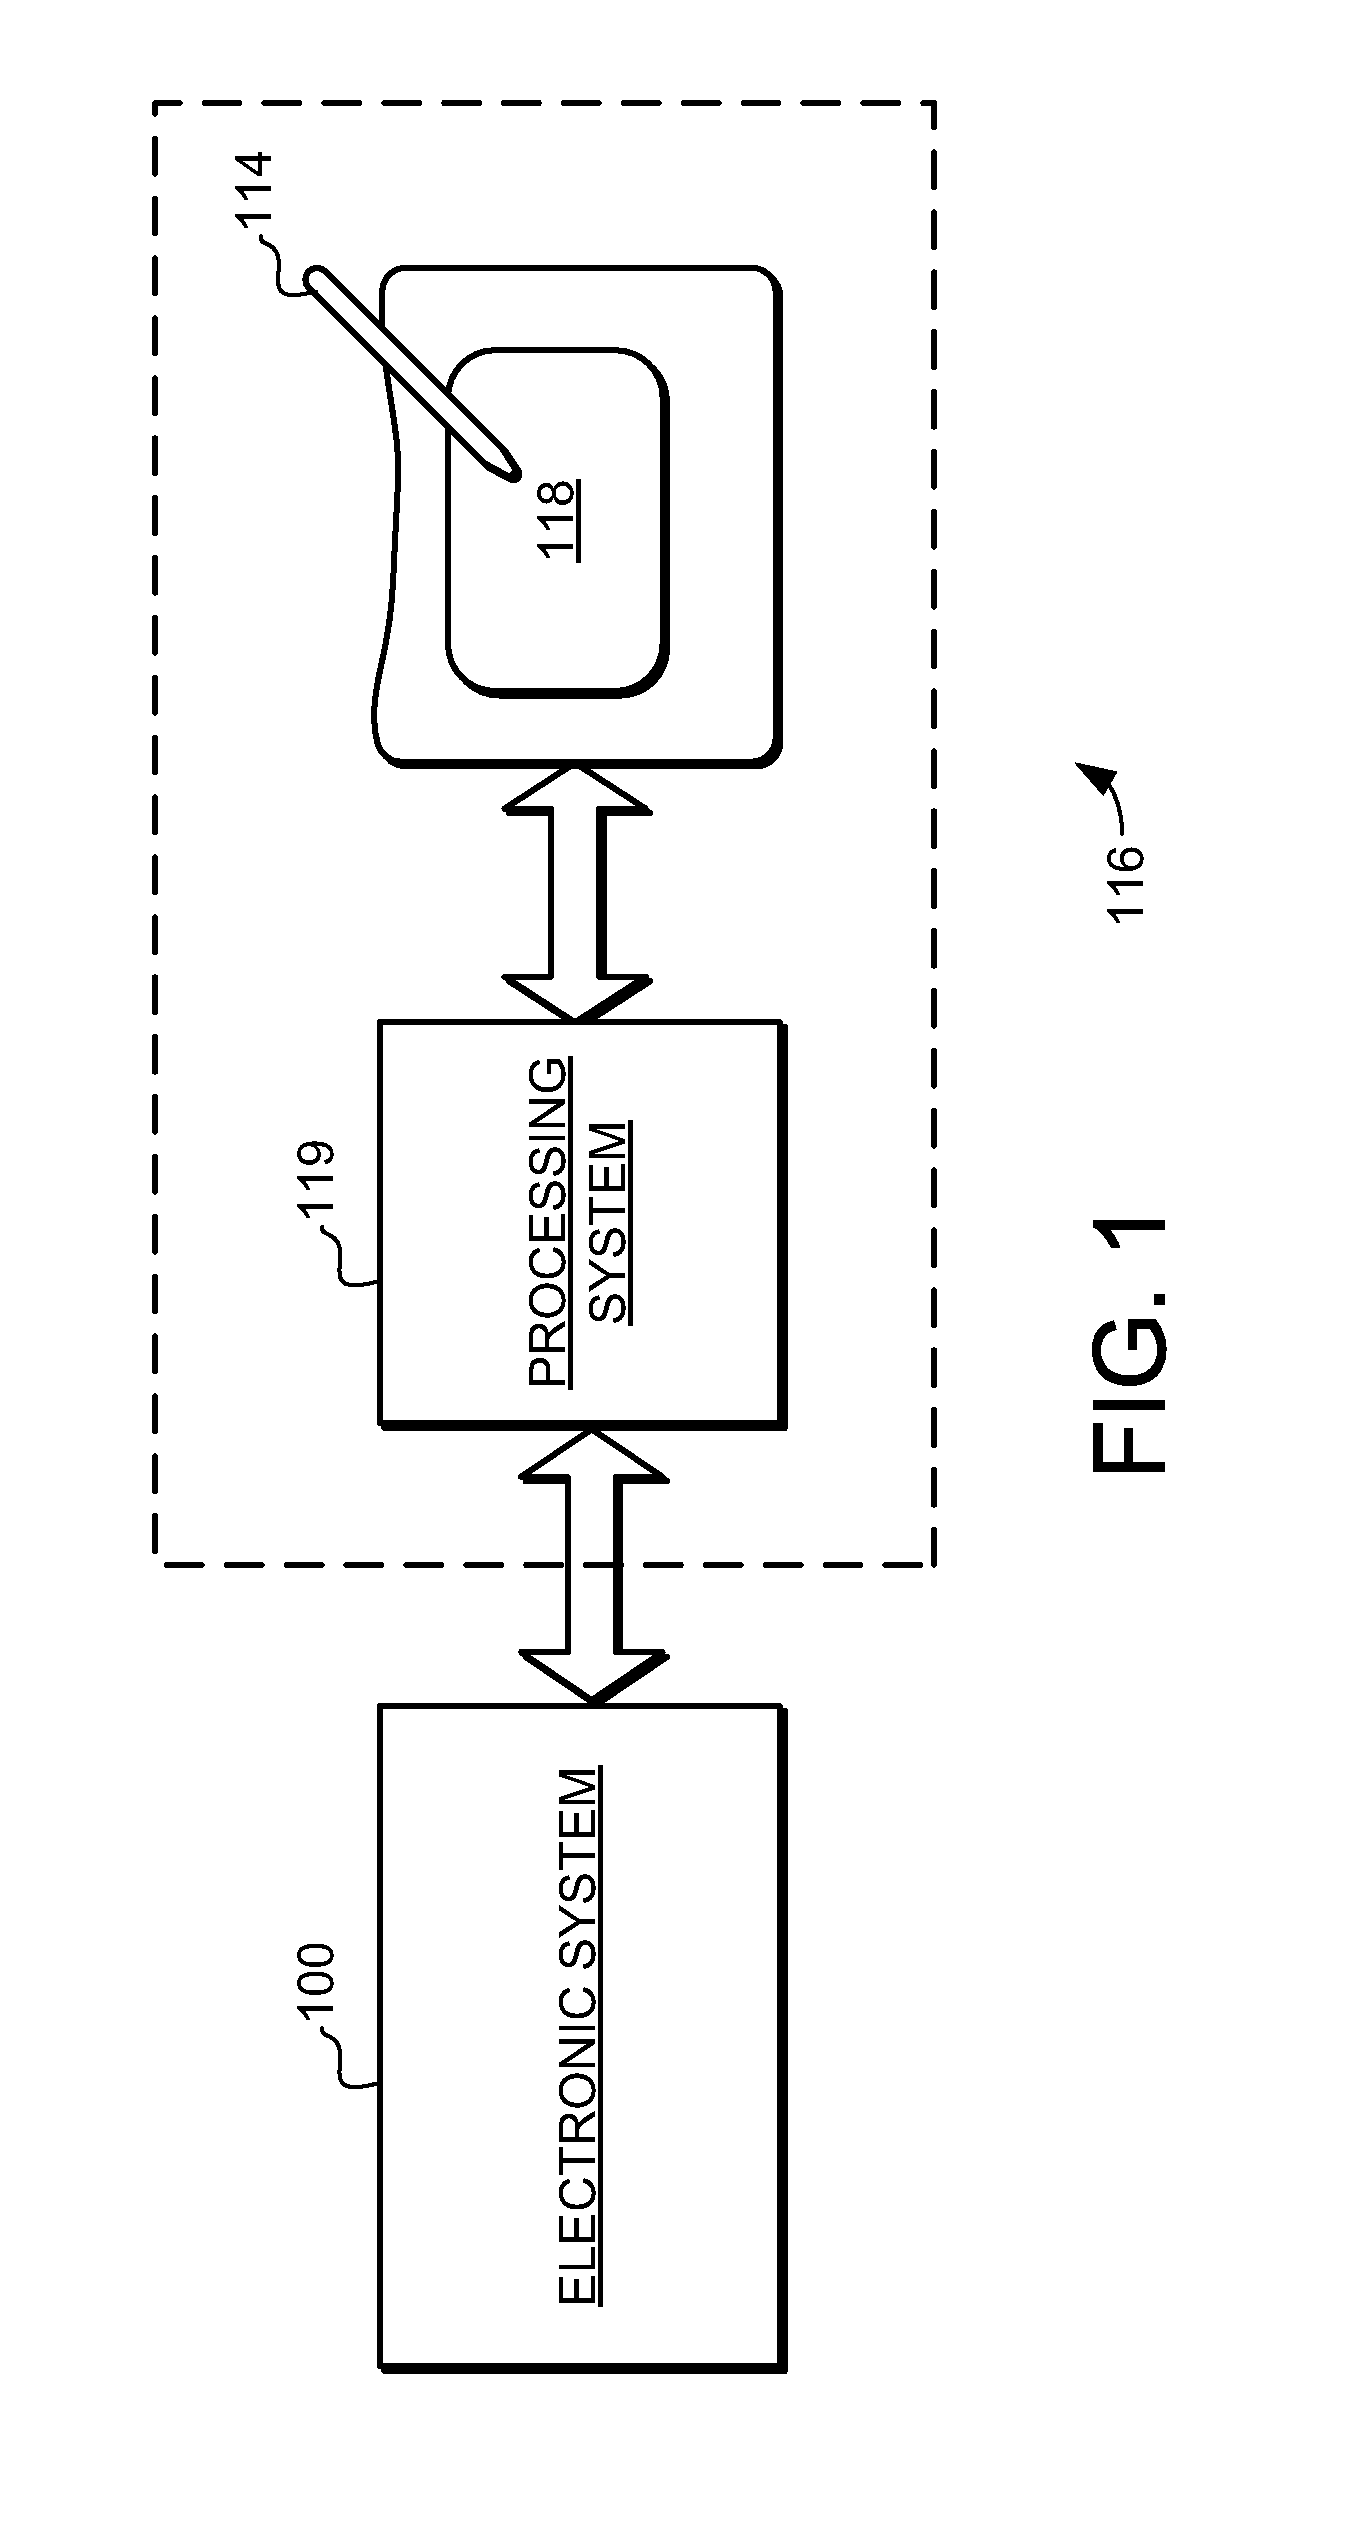 Proximity sensor device and method with swipethrough data entry